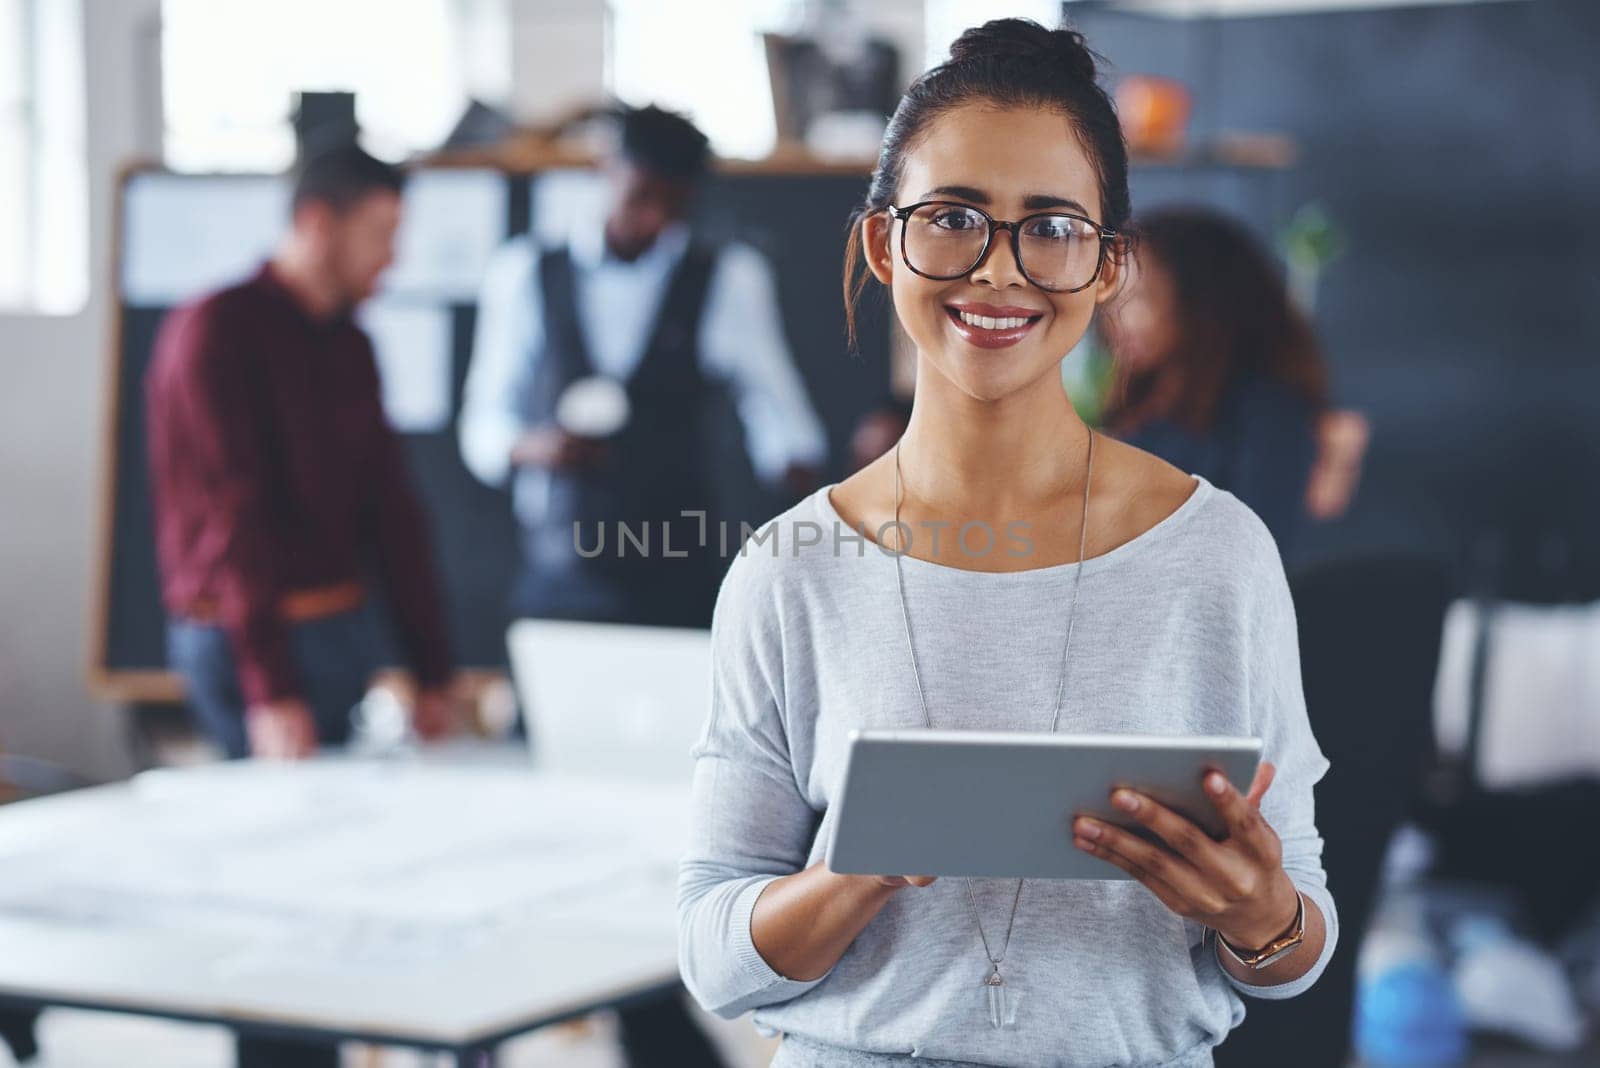 This tablet makes designing easy. Cropped portrait of an attractive young businesswoman using a tablet in the office with her colleagues in the background